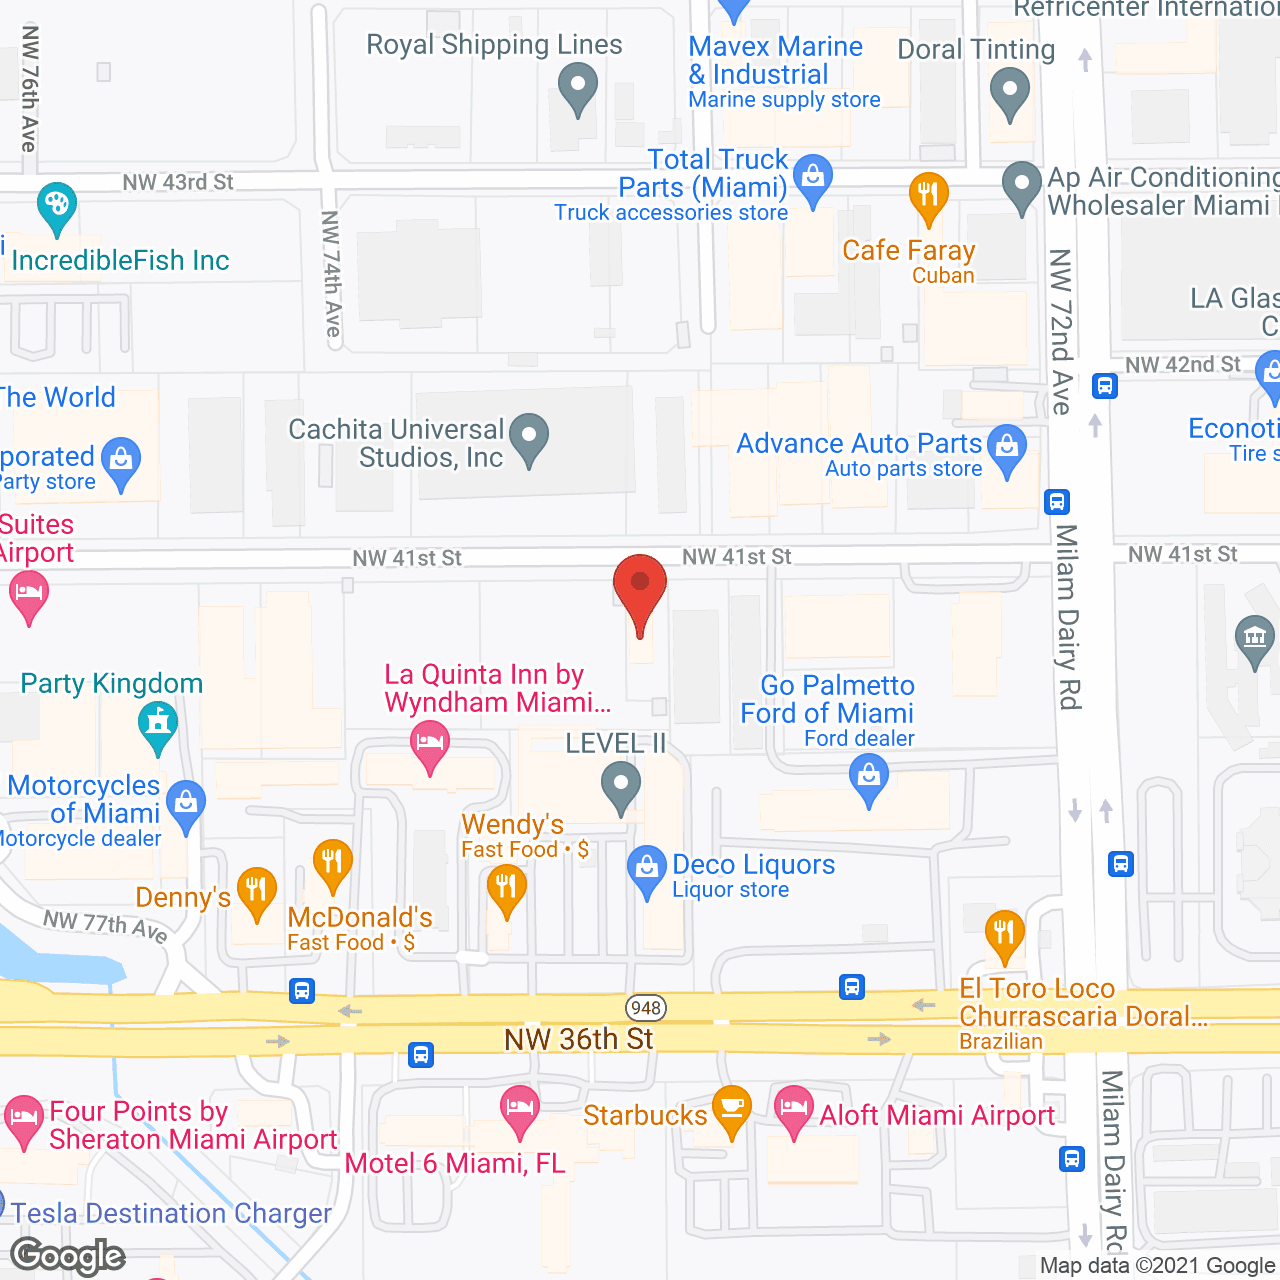 Opportunity Health Svc Corp in google map